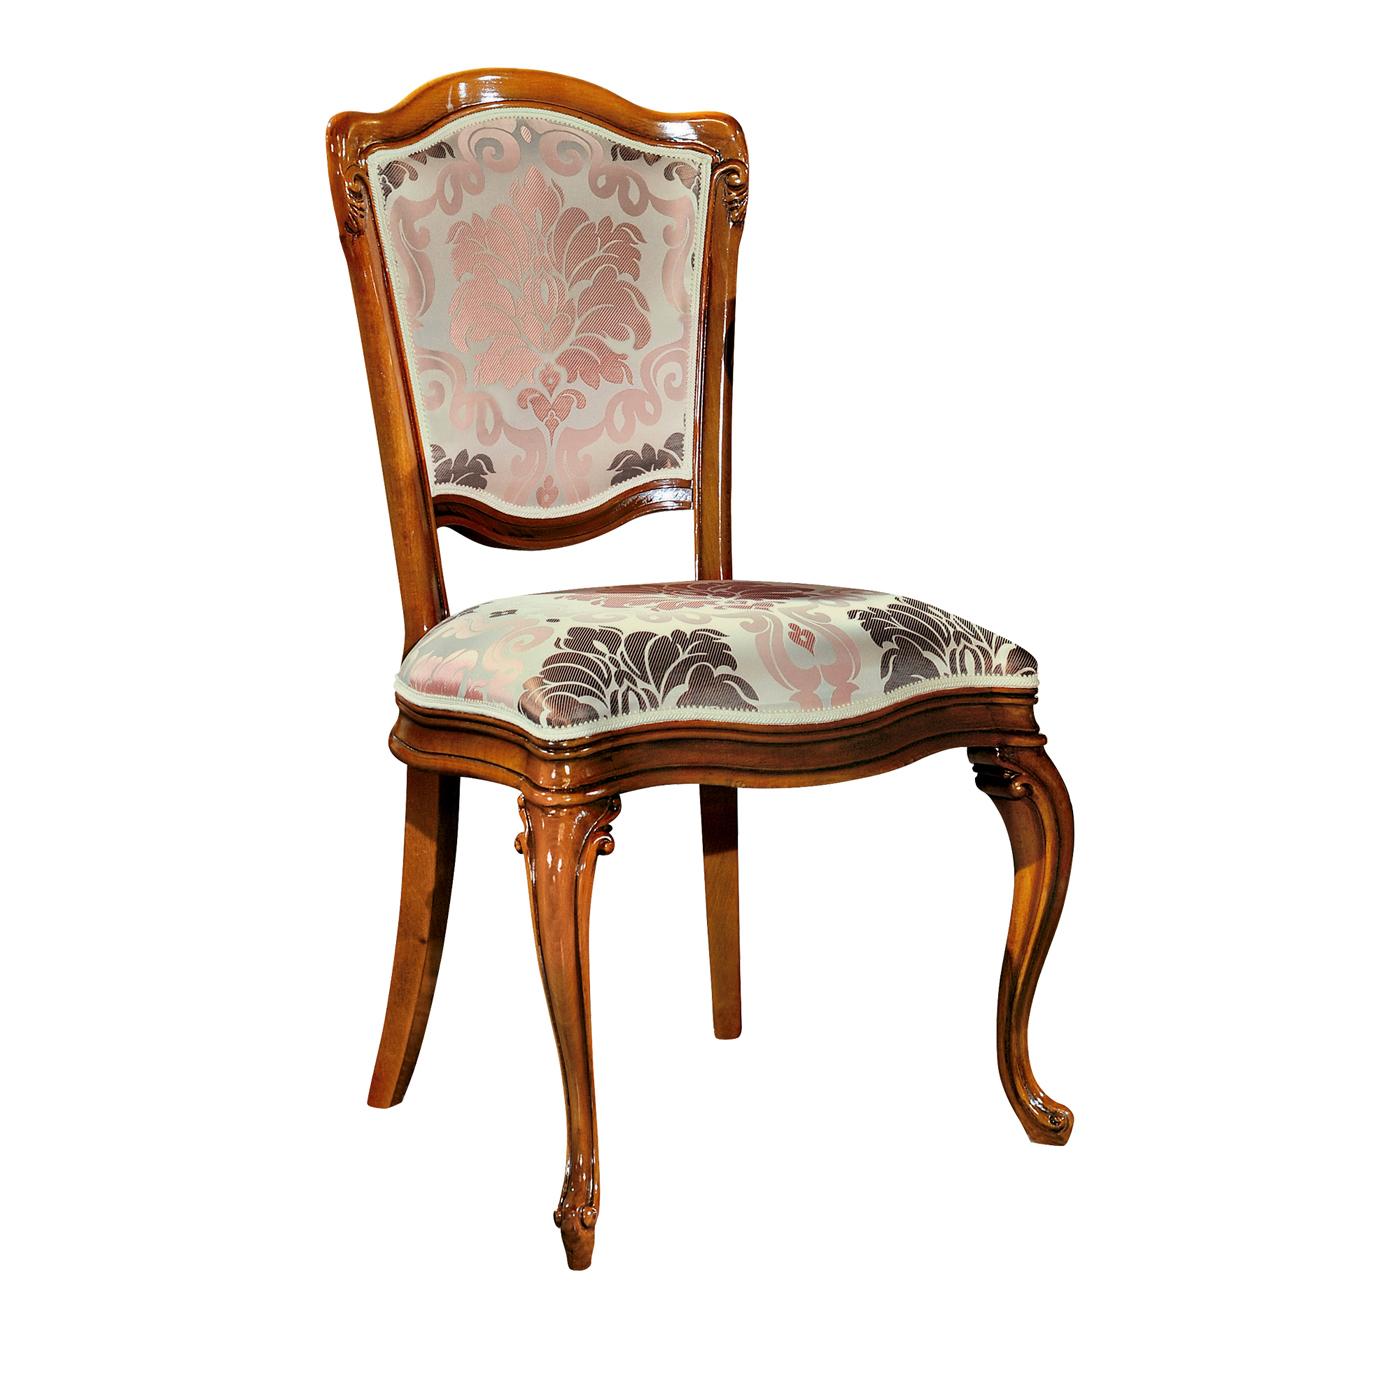 Perfect for completing the dining room, this chair from the Contemporary line has a wooden frame with the two front legs in Queen Anne style that have been finely shaped, in contrast with the two back legs in a simpler, Saber style. The seat and